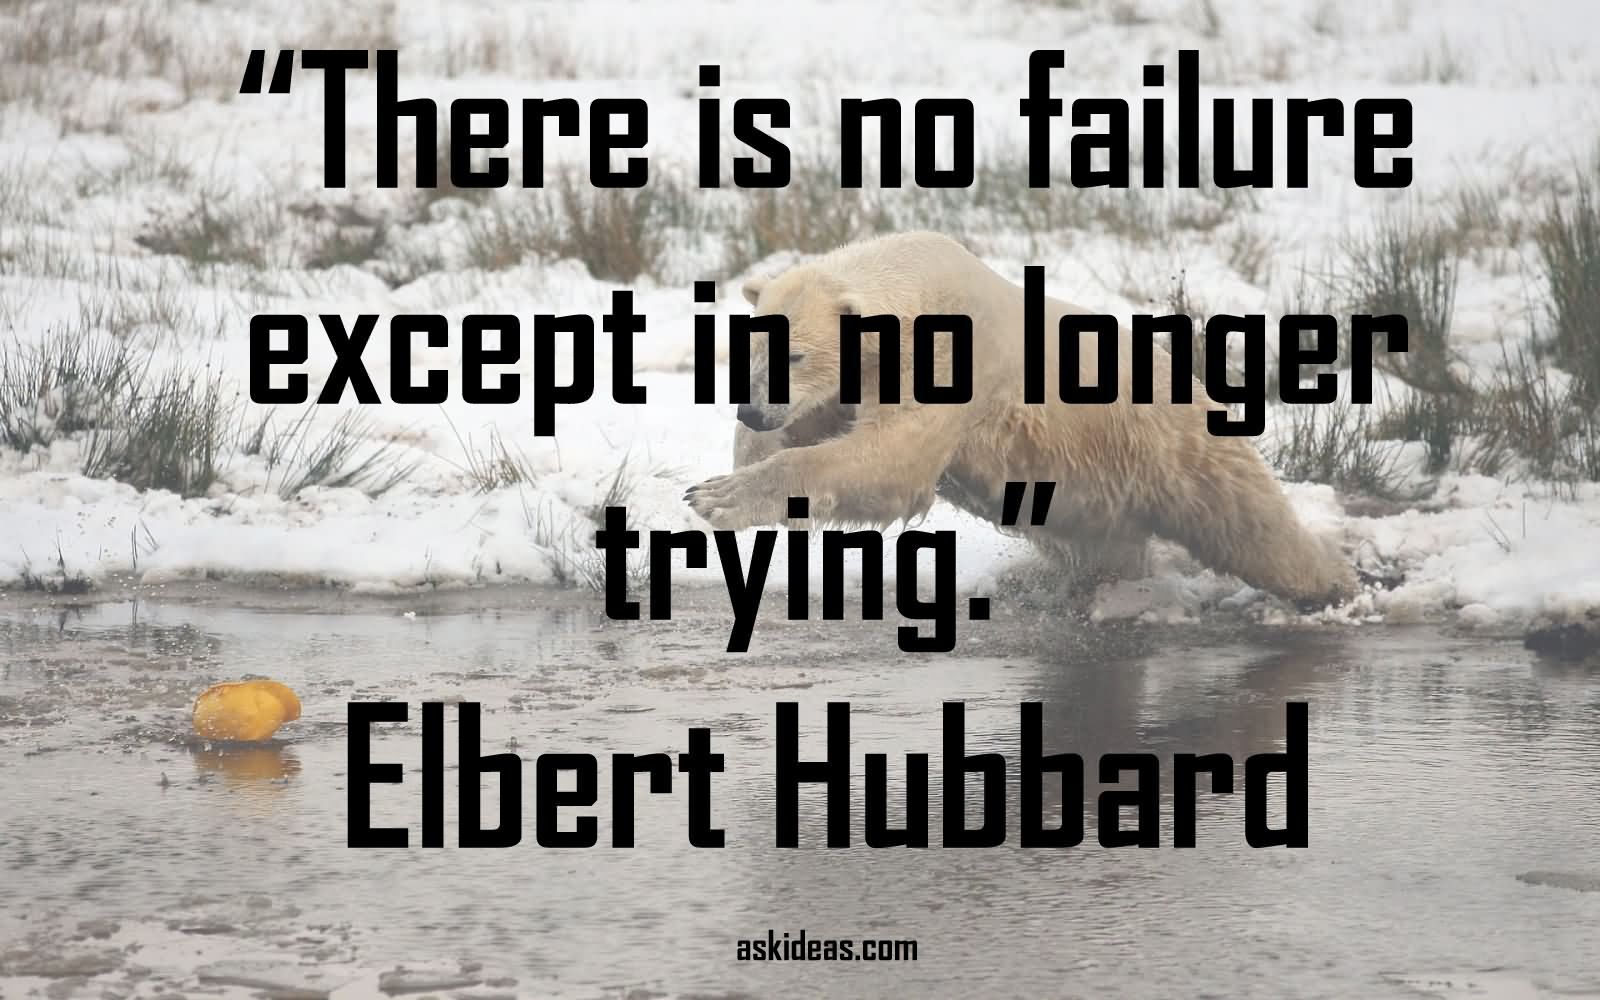 There is no failure except in no longer trying